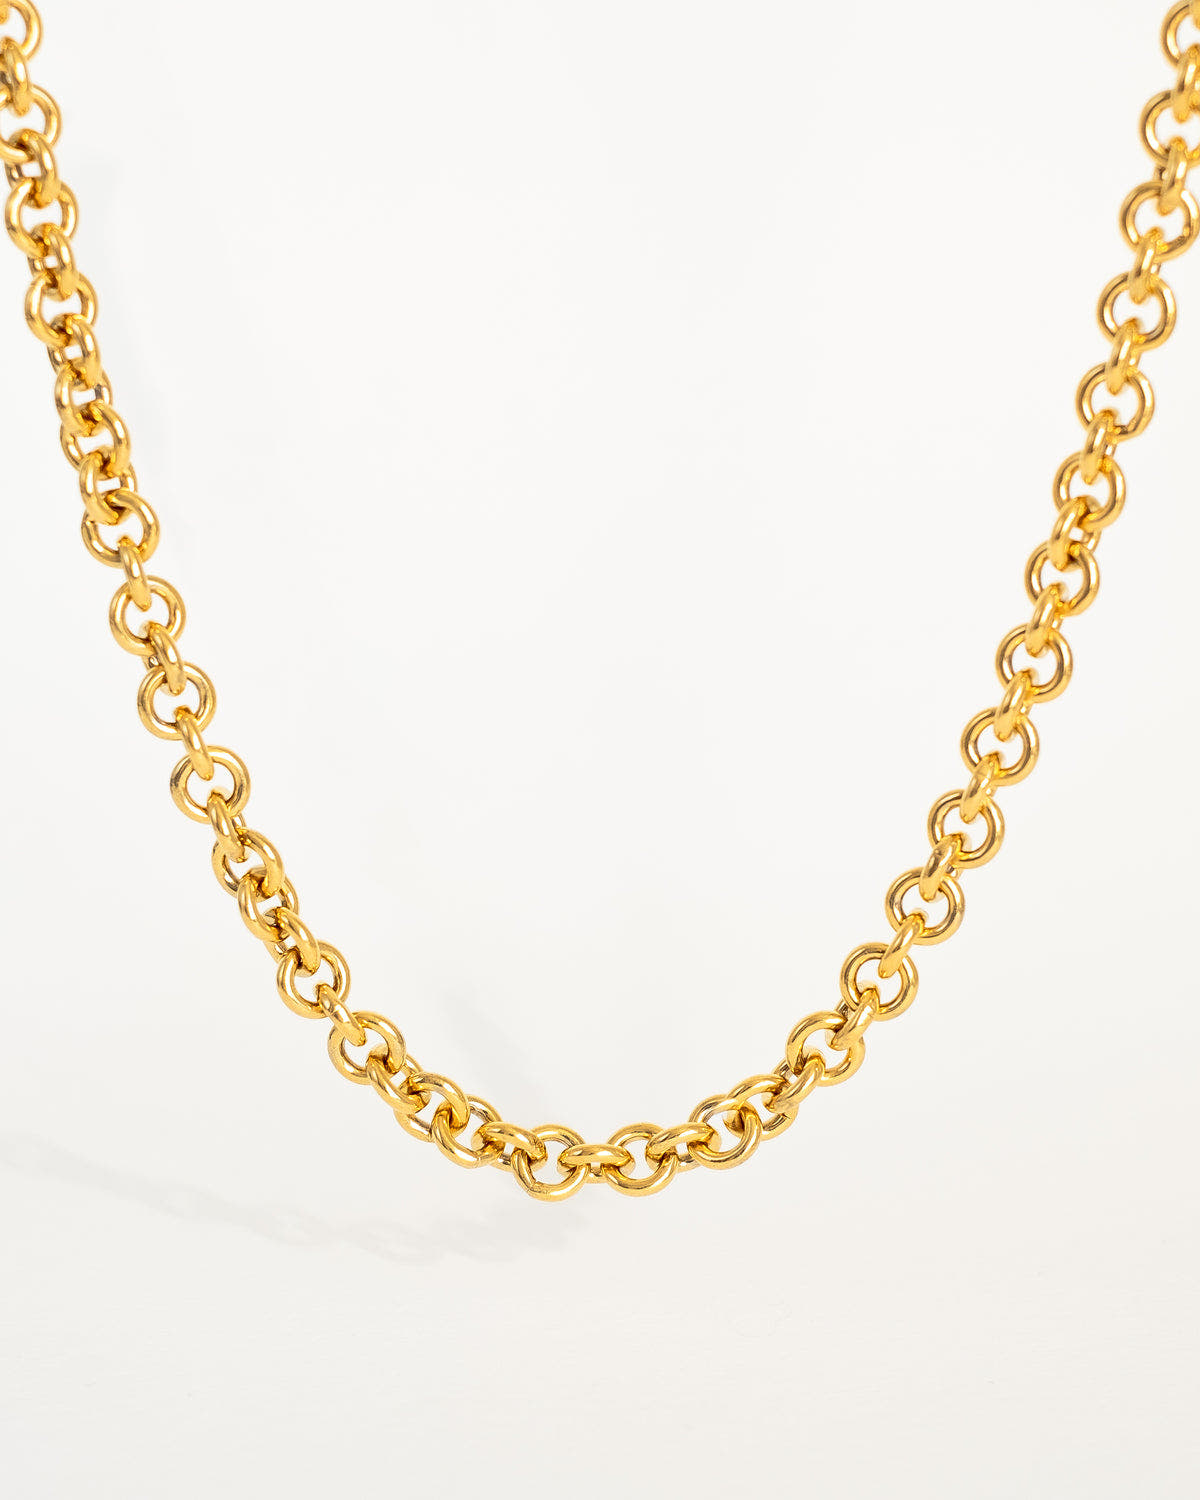 Stylish heavy gold plated chain choker necklace Rolo chain freeshipping - Ollijewelry